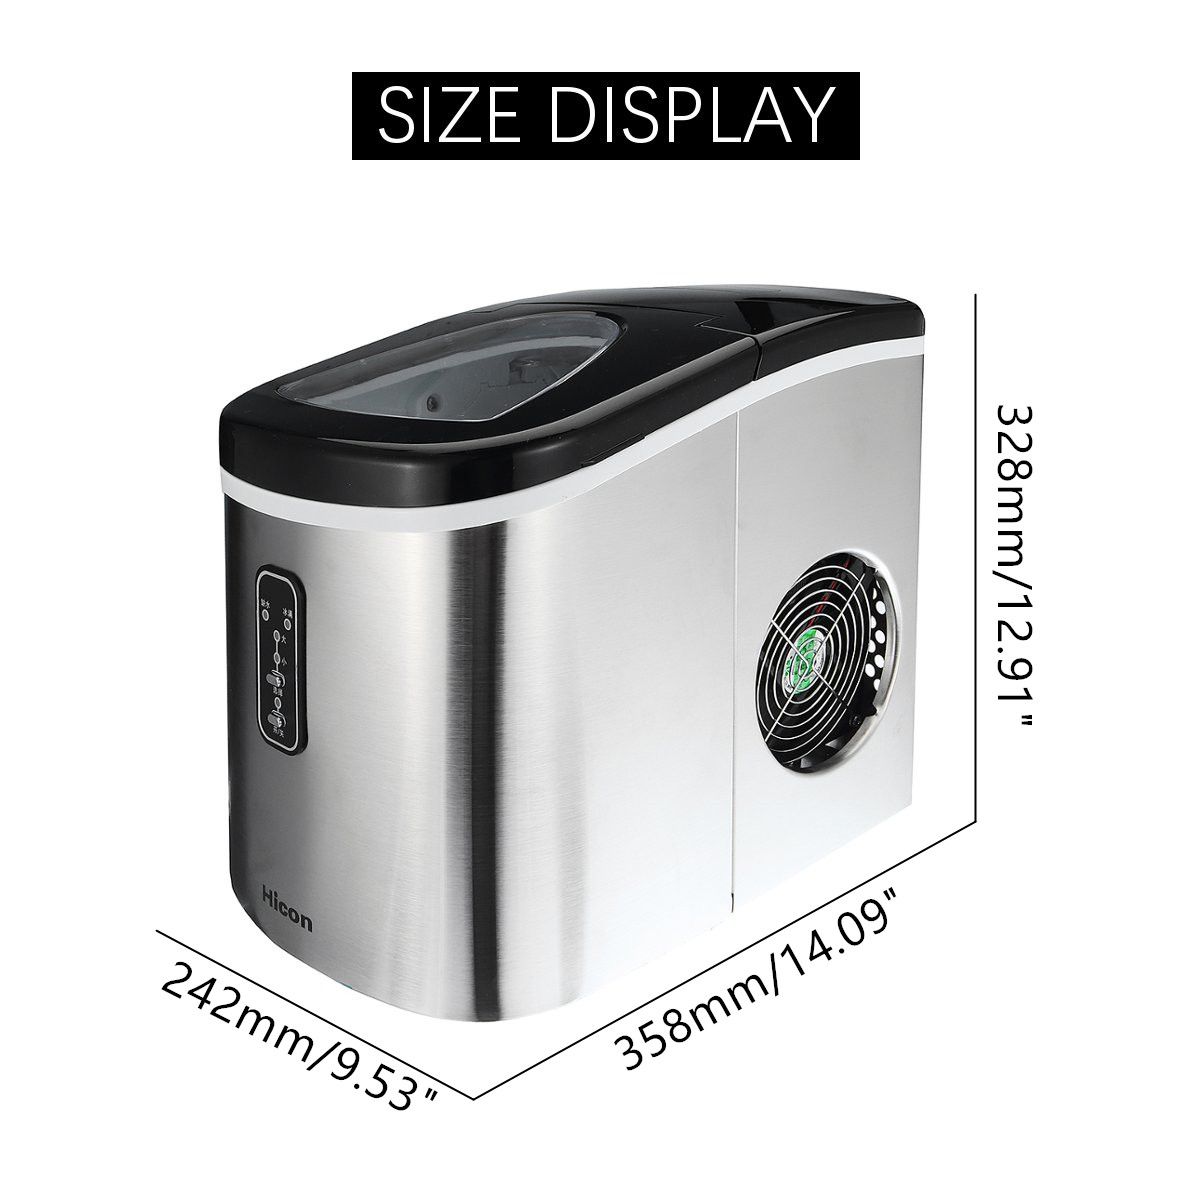 220V-105W-Stainless-Steel-Commercial-Ice-Cube-Maker-Portable-Ice-Machine-1458898